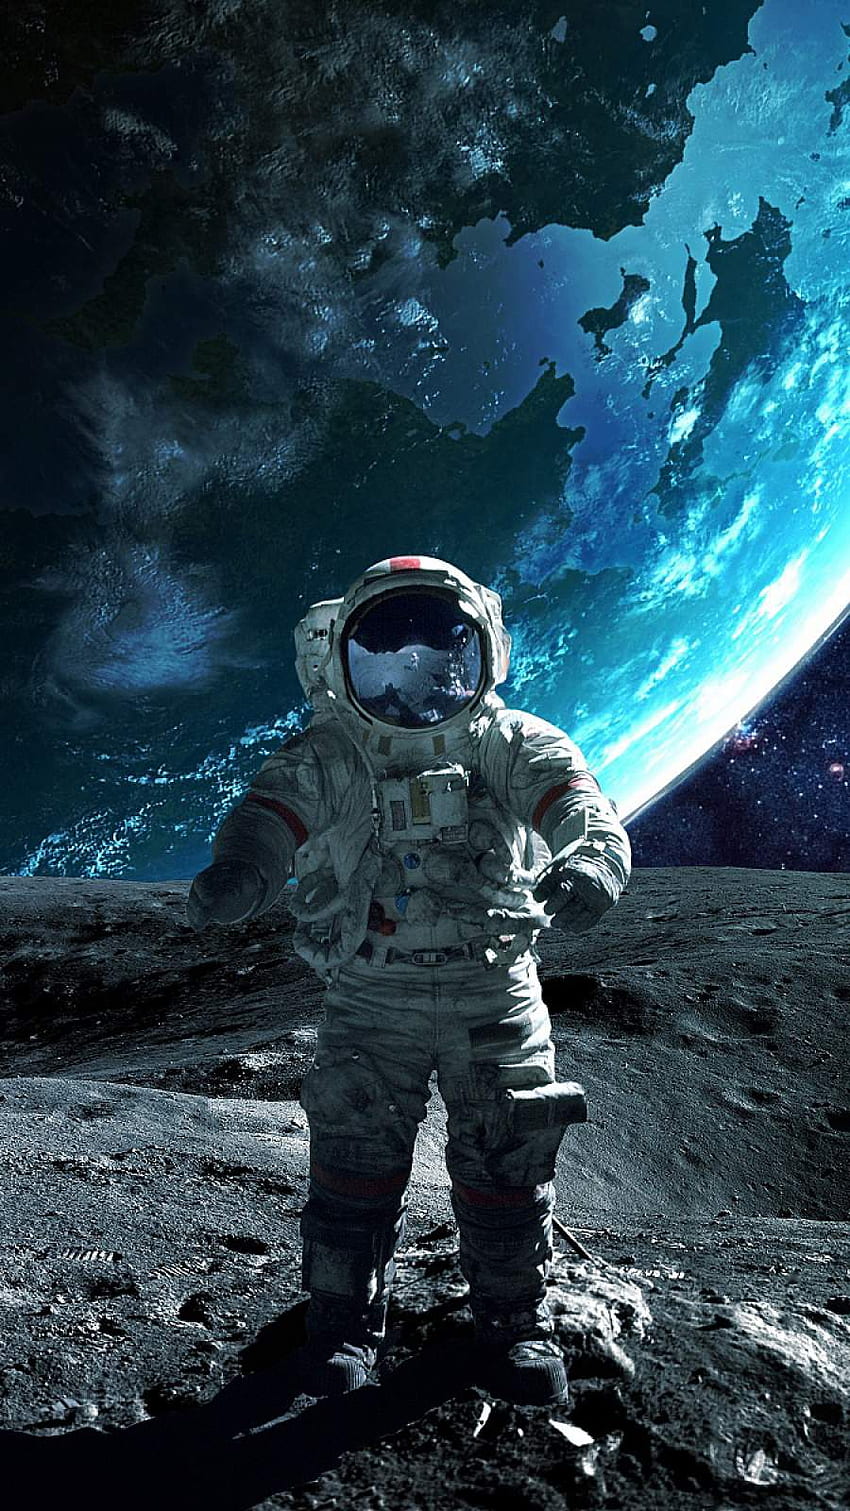 Wallpaper ID 787806  Moon spaceships relaxing 1080P funny Earth  beers outer Cosmonaut carlsberg Suits space free download